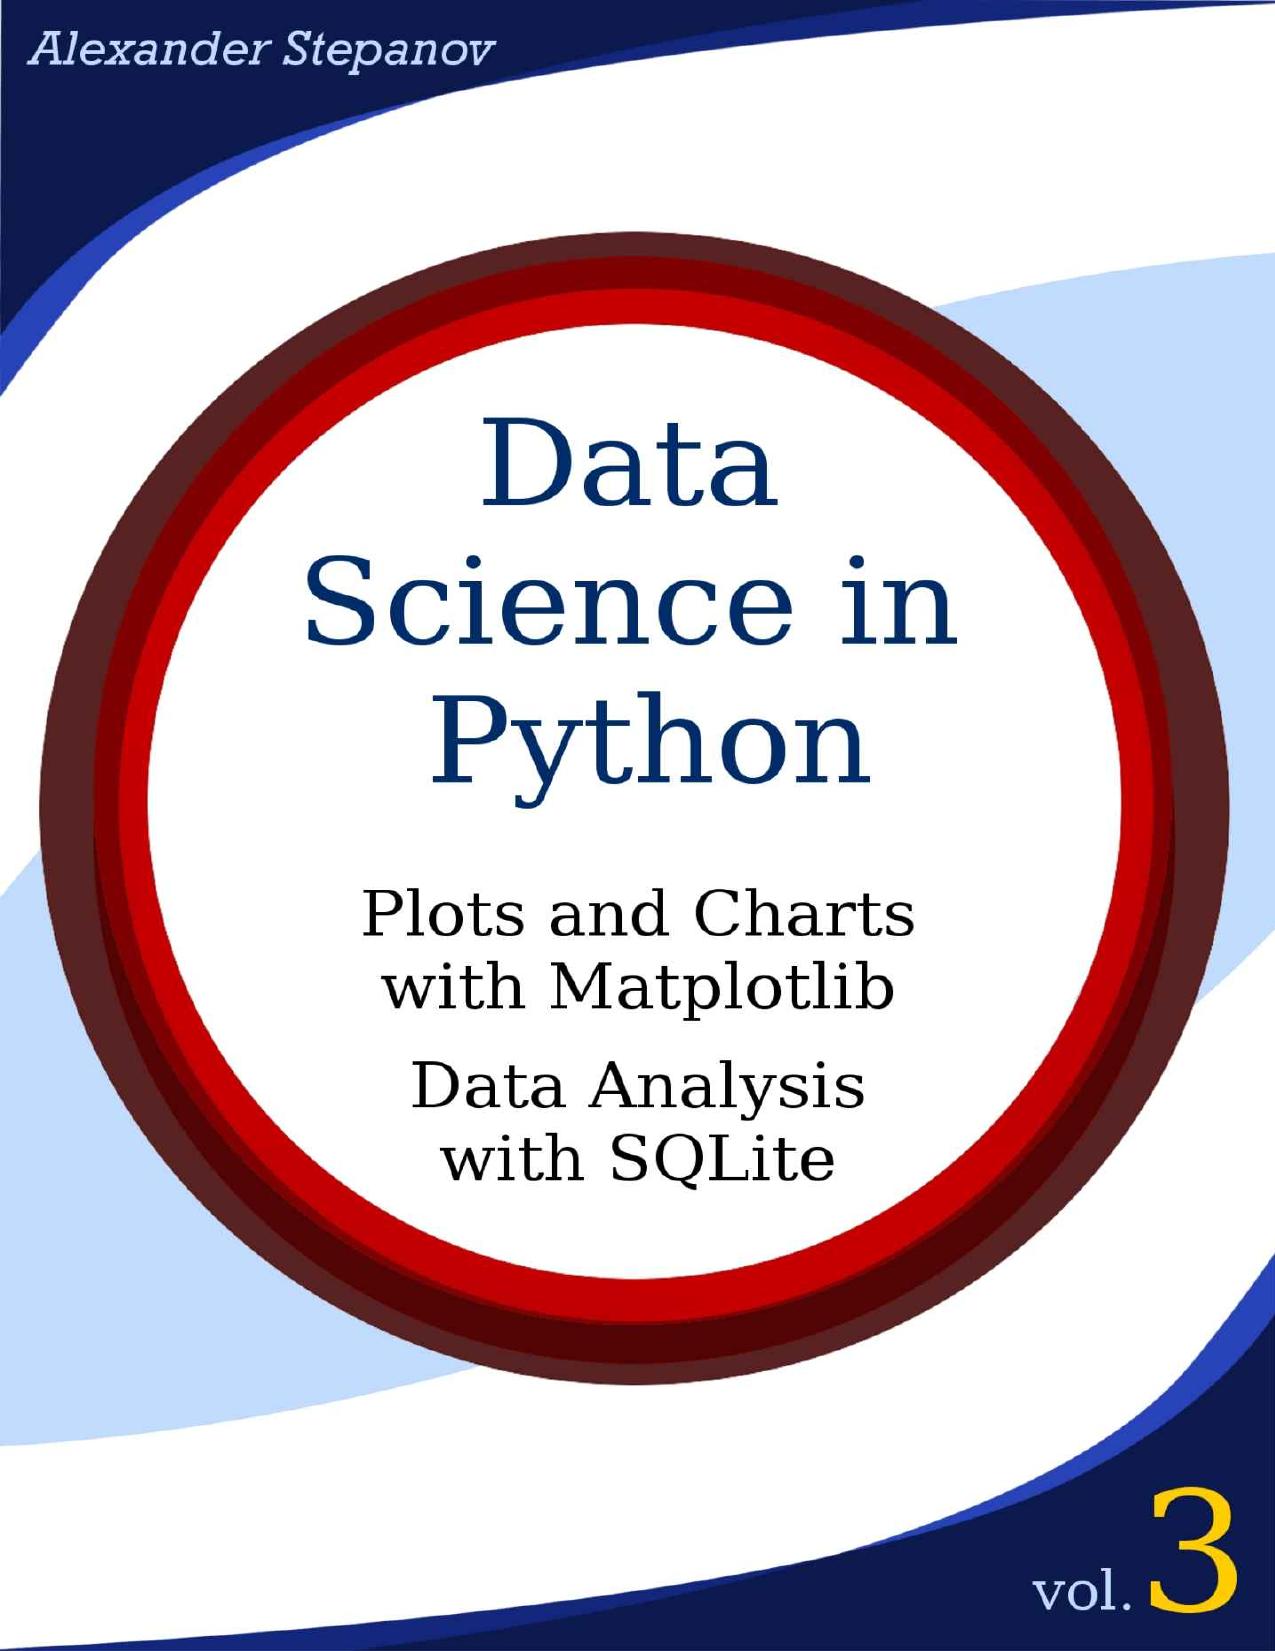 Stepanov A. Data Science in Python Vol 3. Plots and Charts with Matplot.,...2016 by Zamzar